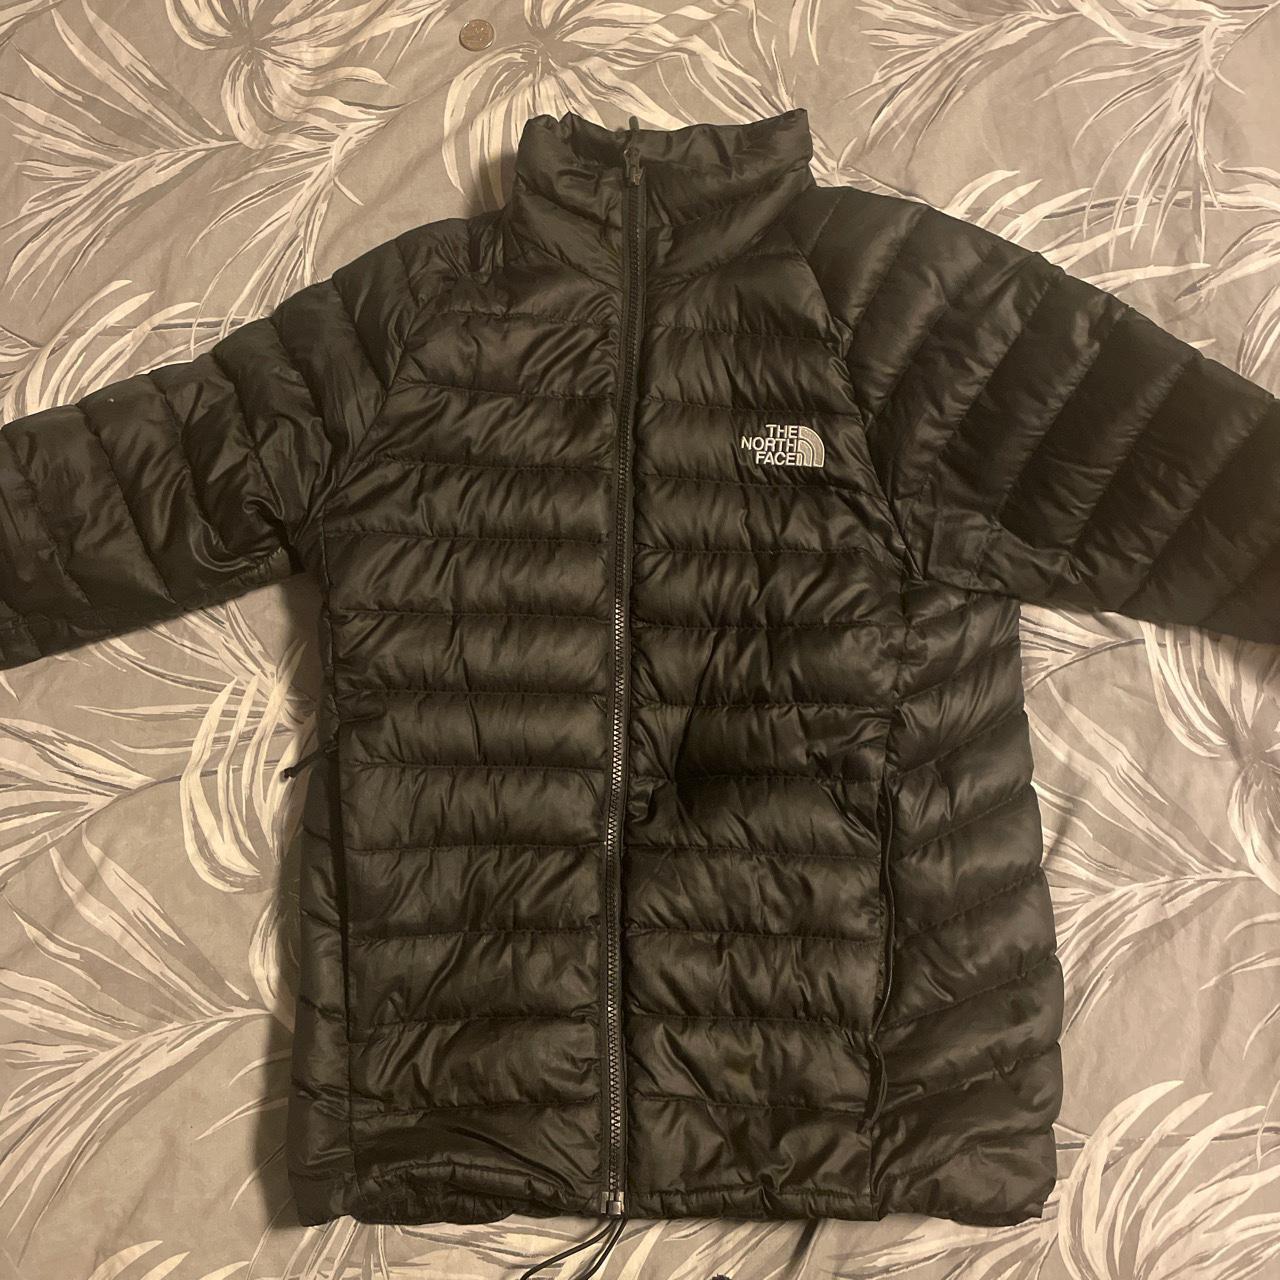 North Face Bomber Jacket Size Small £40 willing to... - Depop